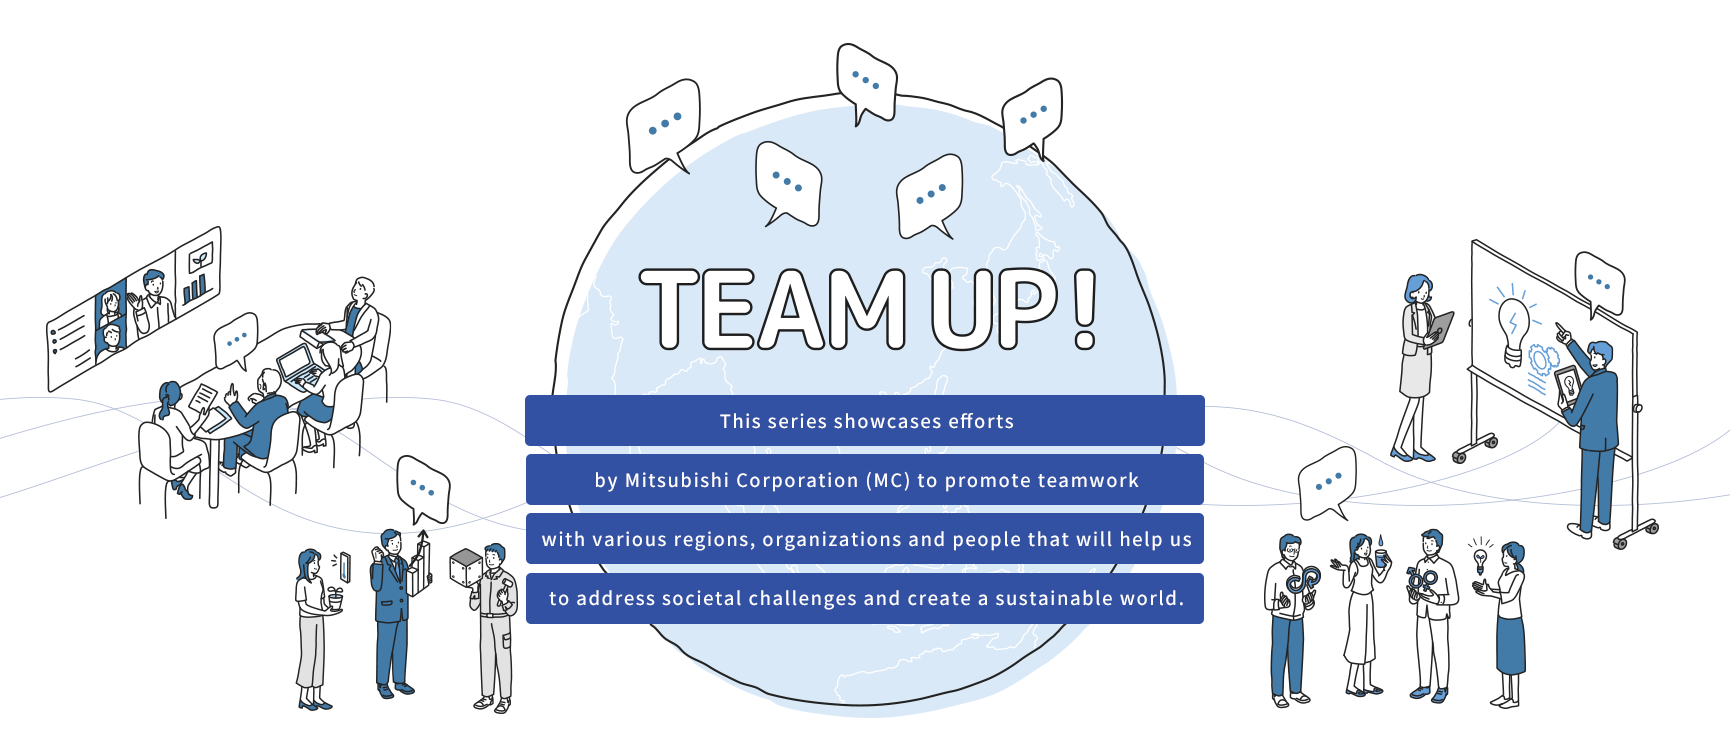 This series showcases efforts by Mitsubishi Corporation (MC) to promote teamwork with various regions, organizations and people that will help us to address societal challenges and create a sustainable world.